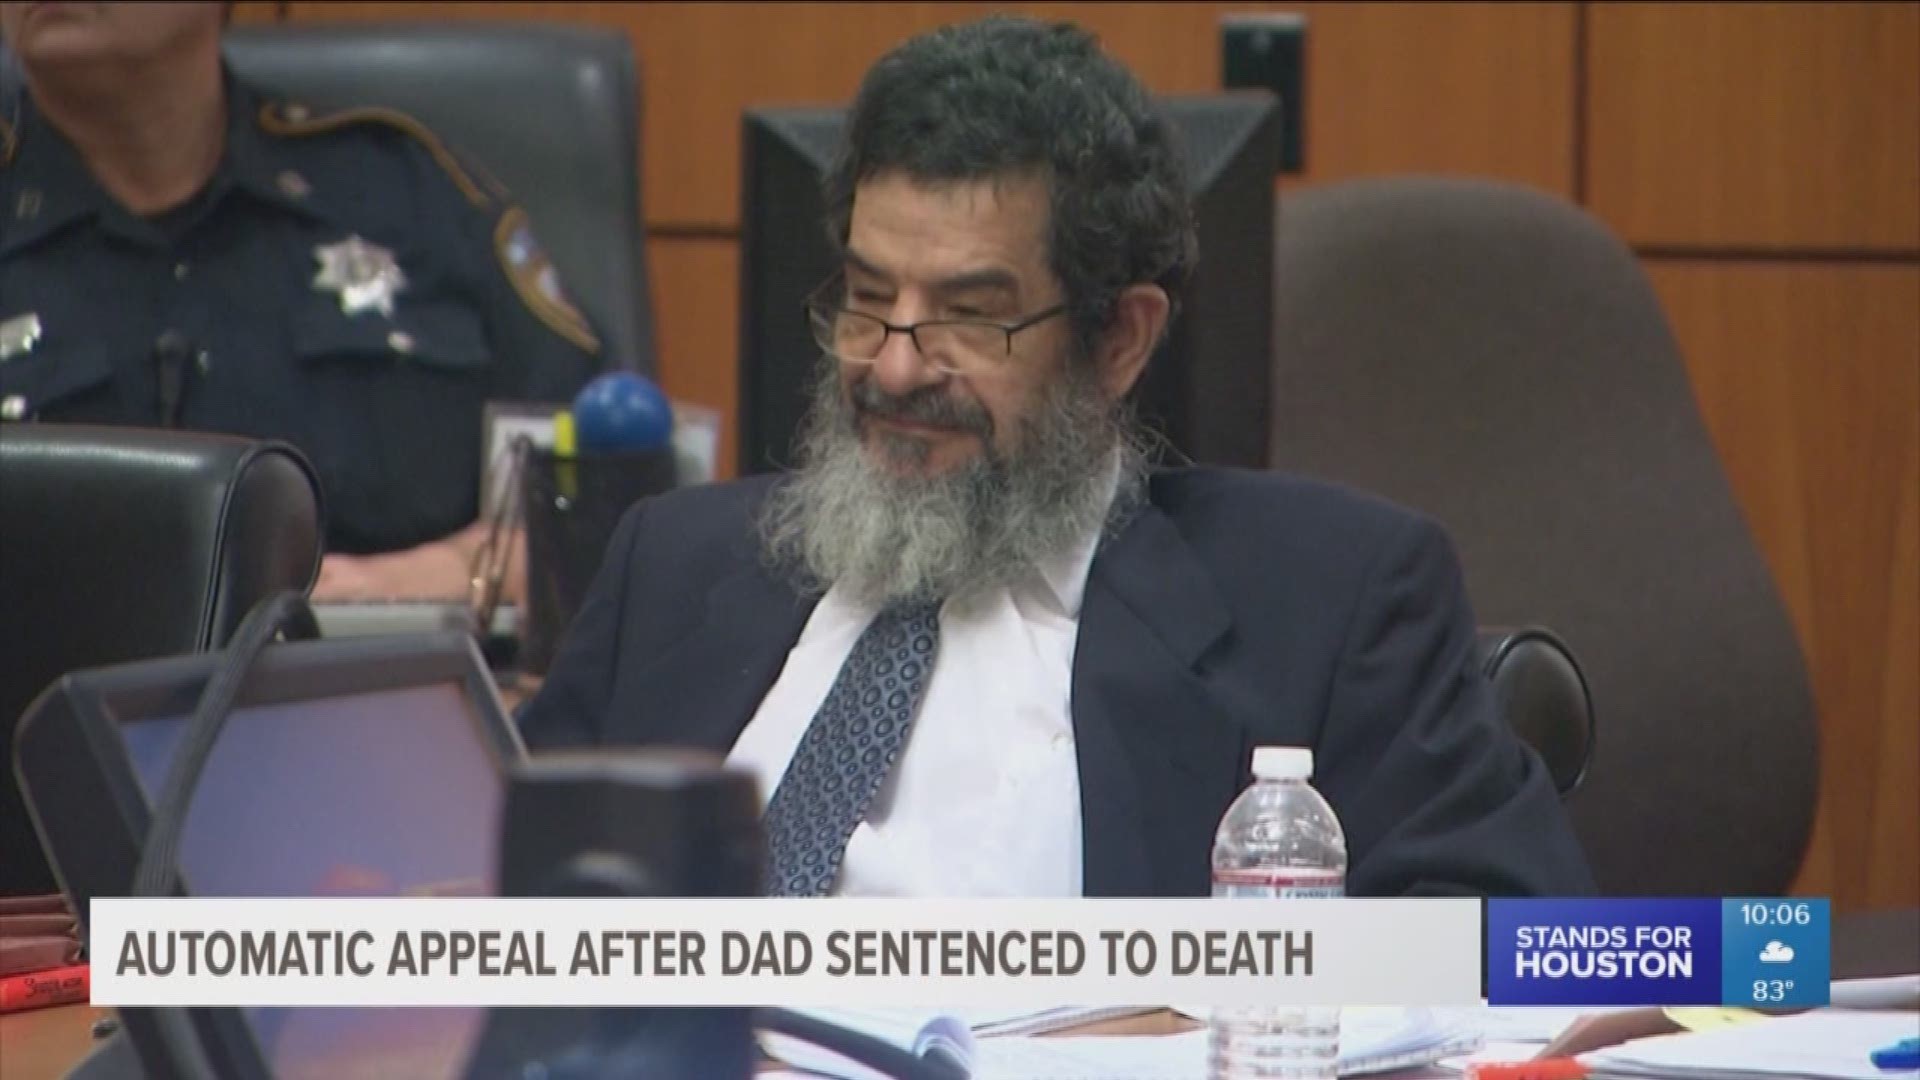 A Jordanian man has been sentenced to death for a pair of "honor killings" in Houston.